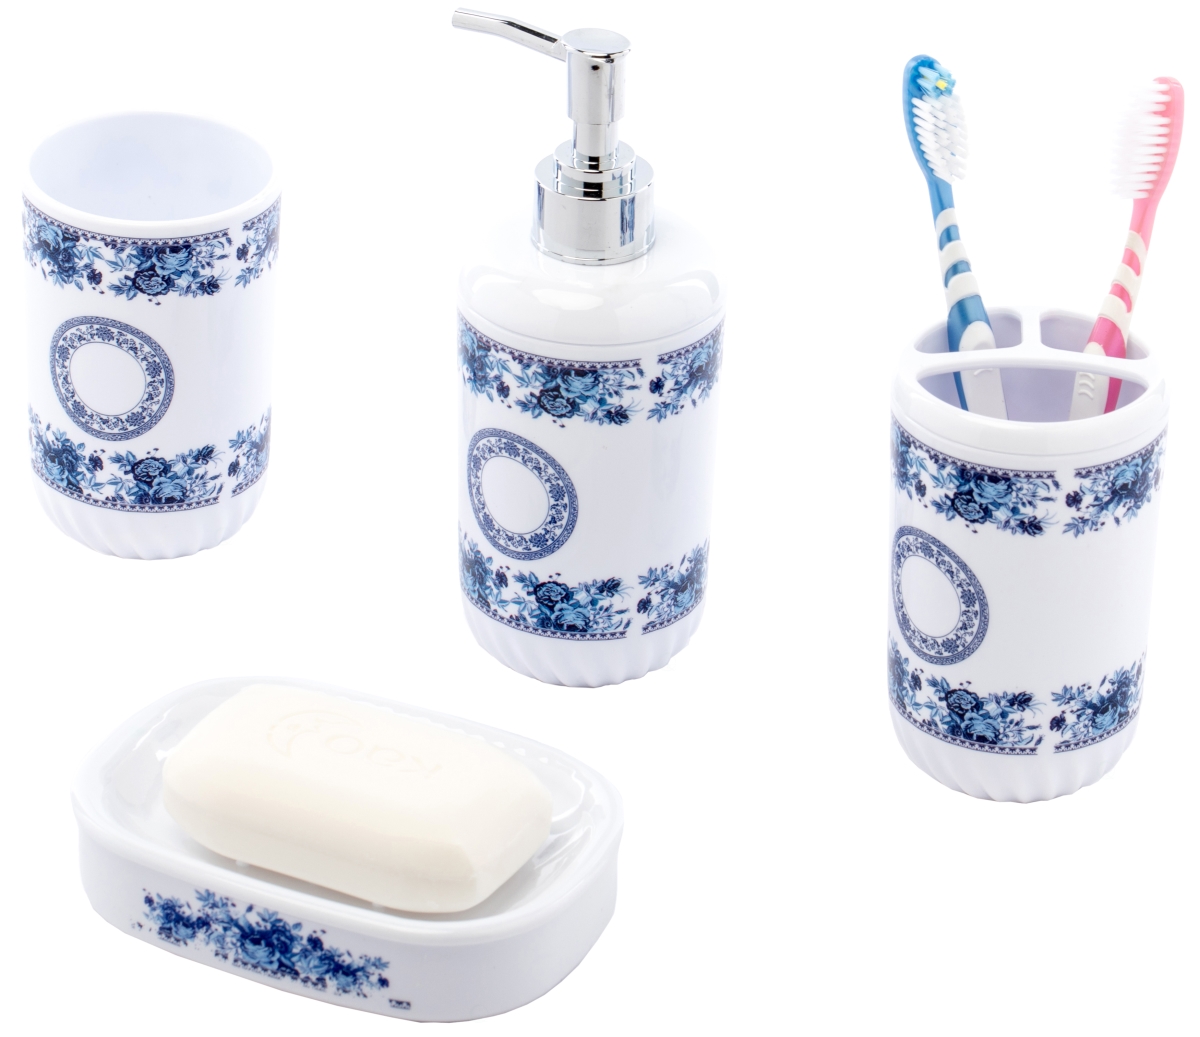 Basicwise QI003263.WT 5.5 x 0.71 x 6.5 in. Bathroom Accessory Set, White - Soap Dispenser - Toothbrush Holder -Tumbler - Soap Dish - 4 Pie